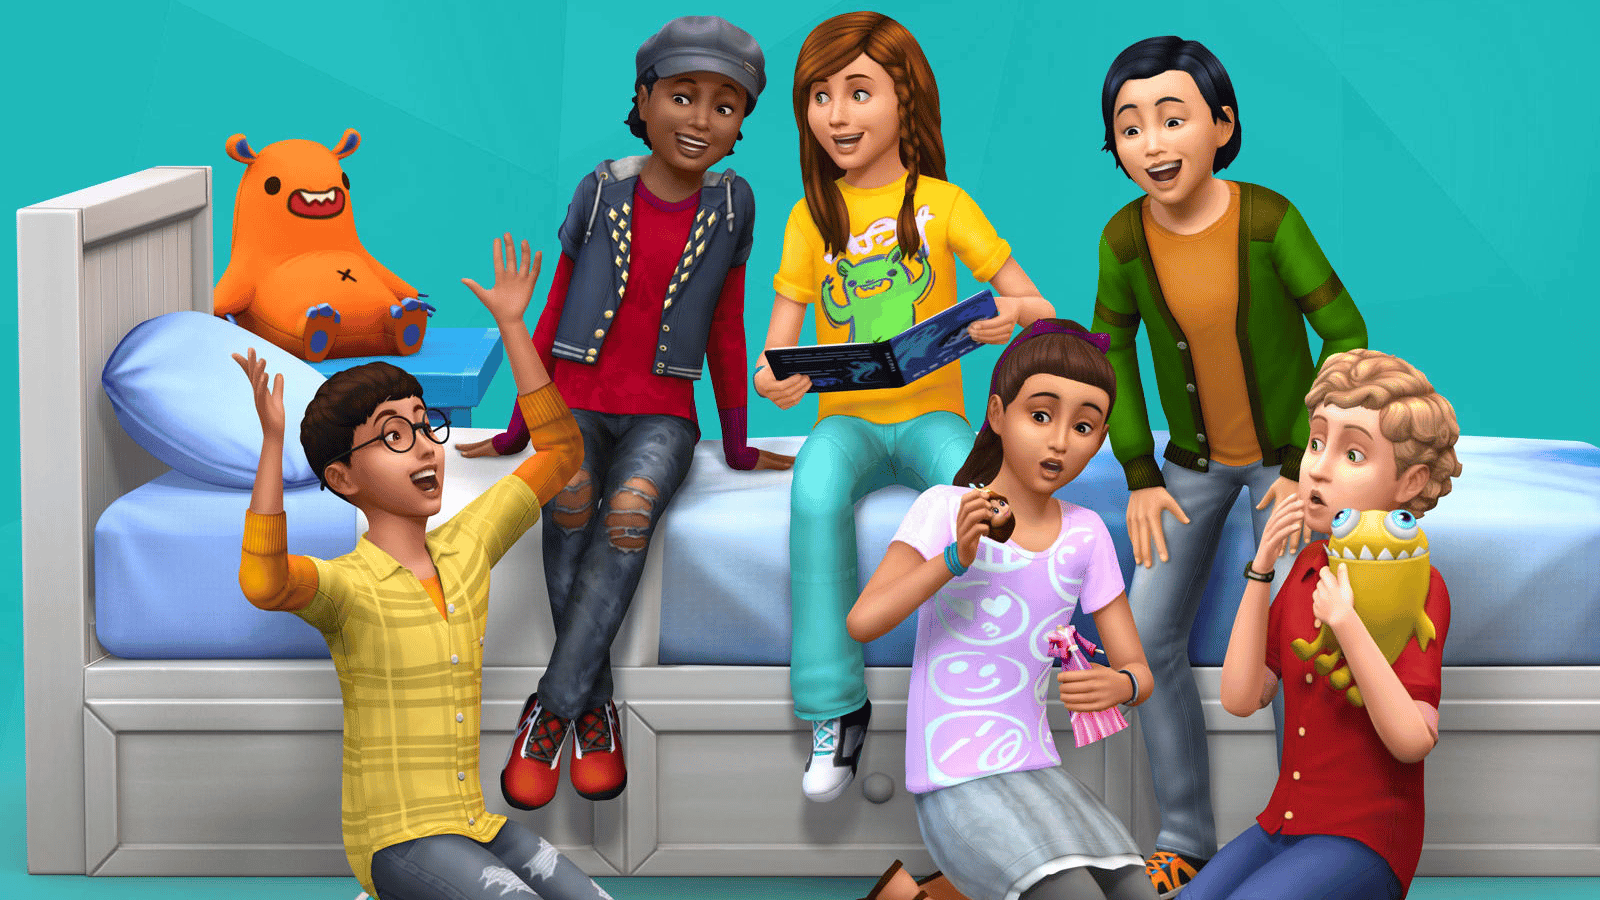 A group of children in The Sims 4 promo material